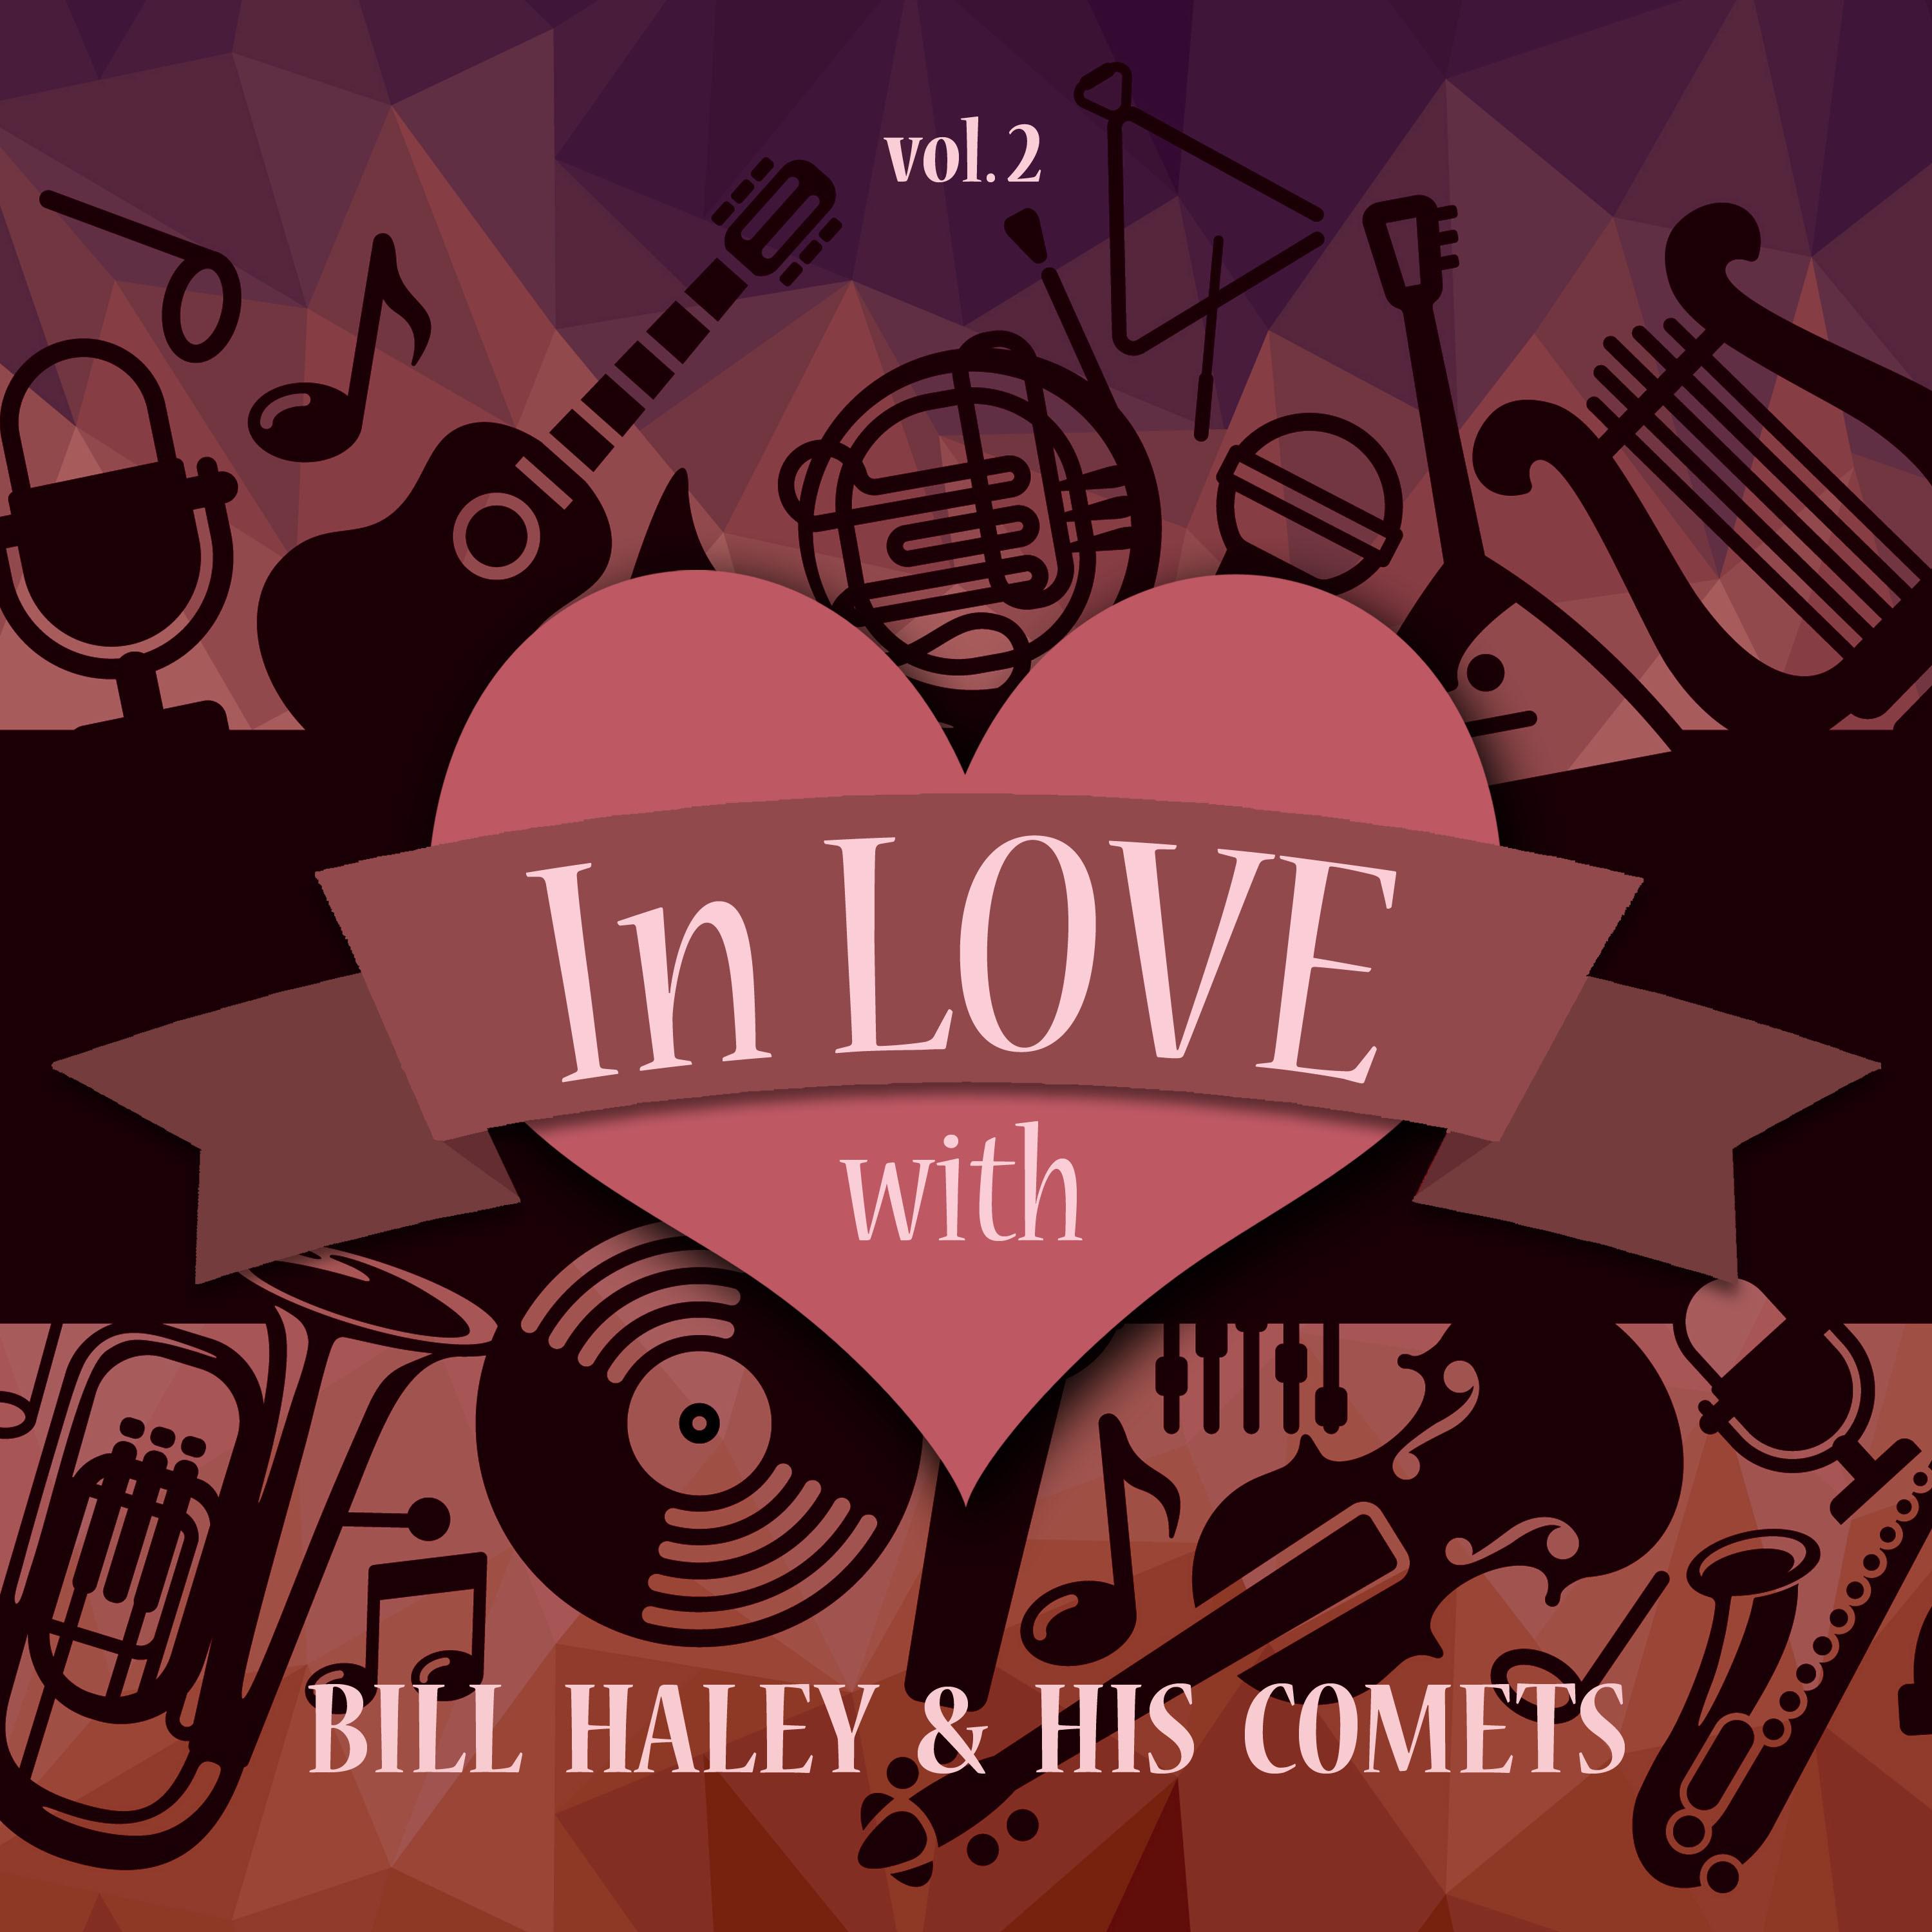 In Love with Bill Haley & His Comets, Vol. 2